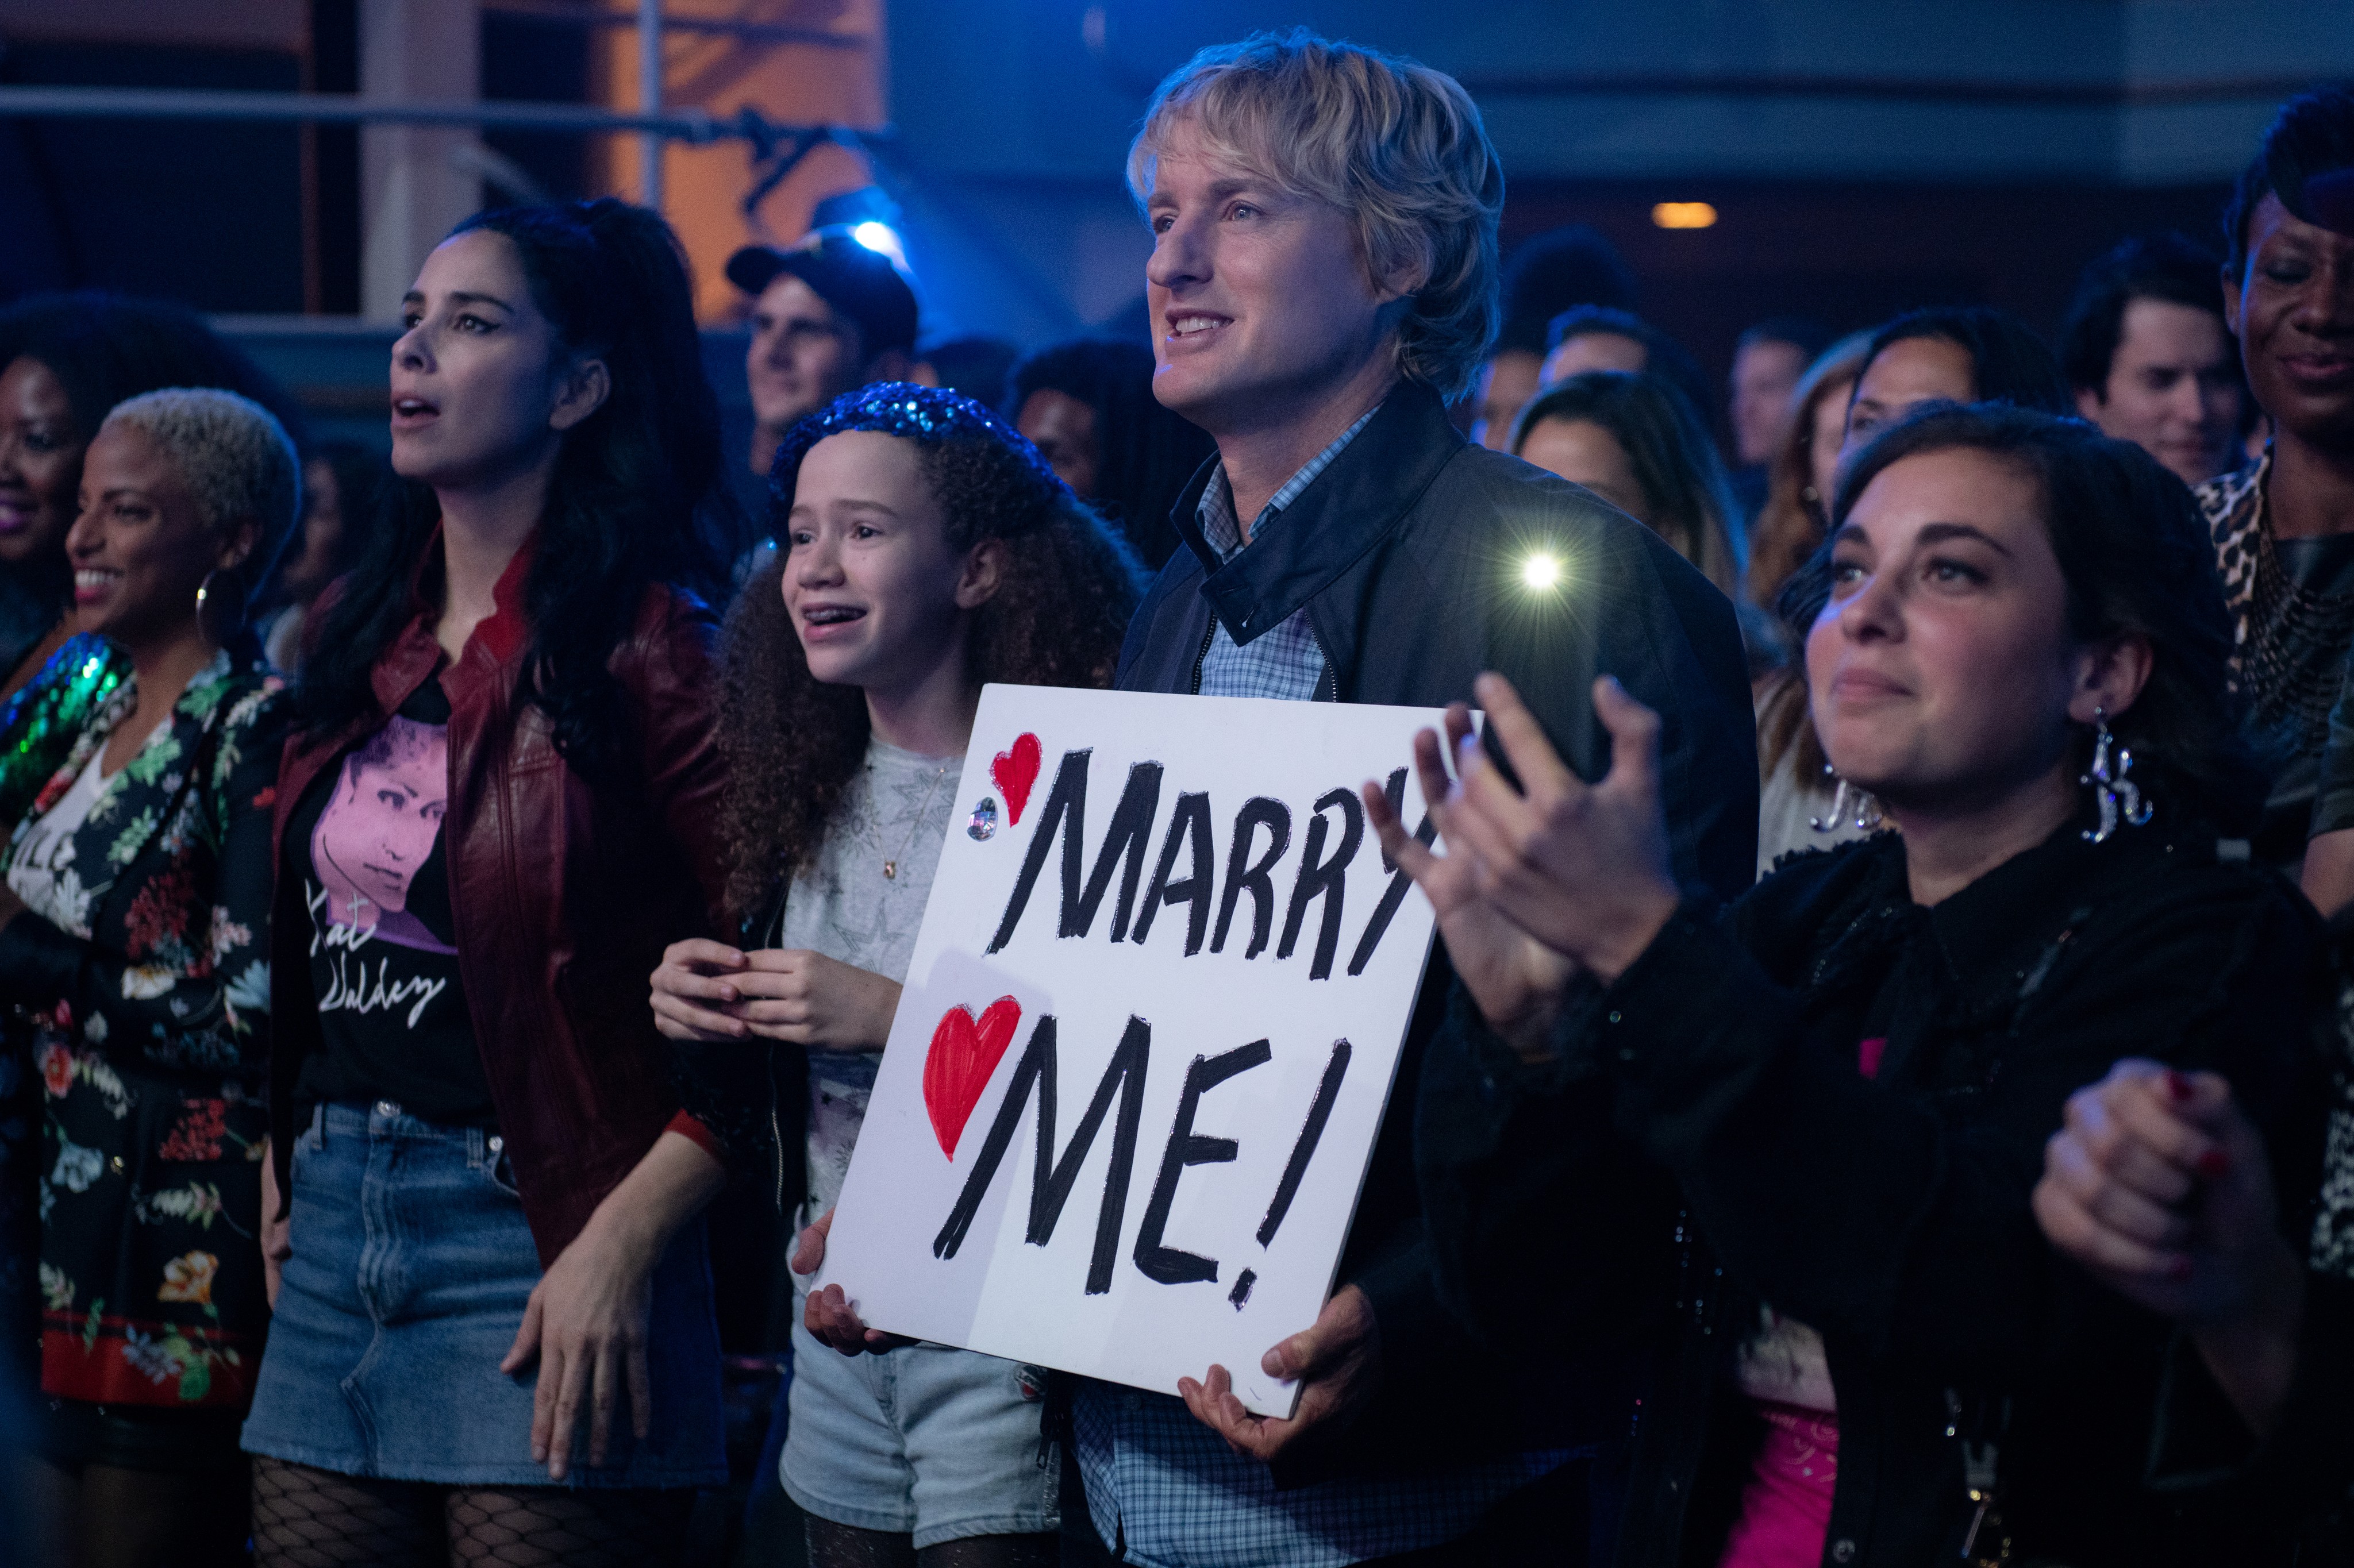 man holds sign in crowd in Marry Me